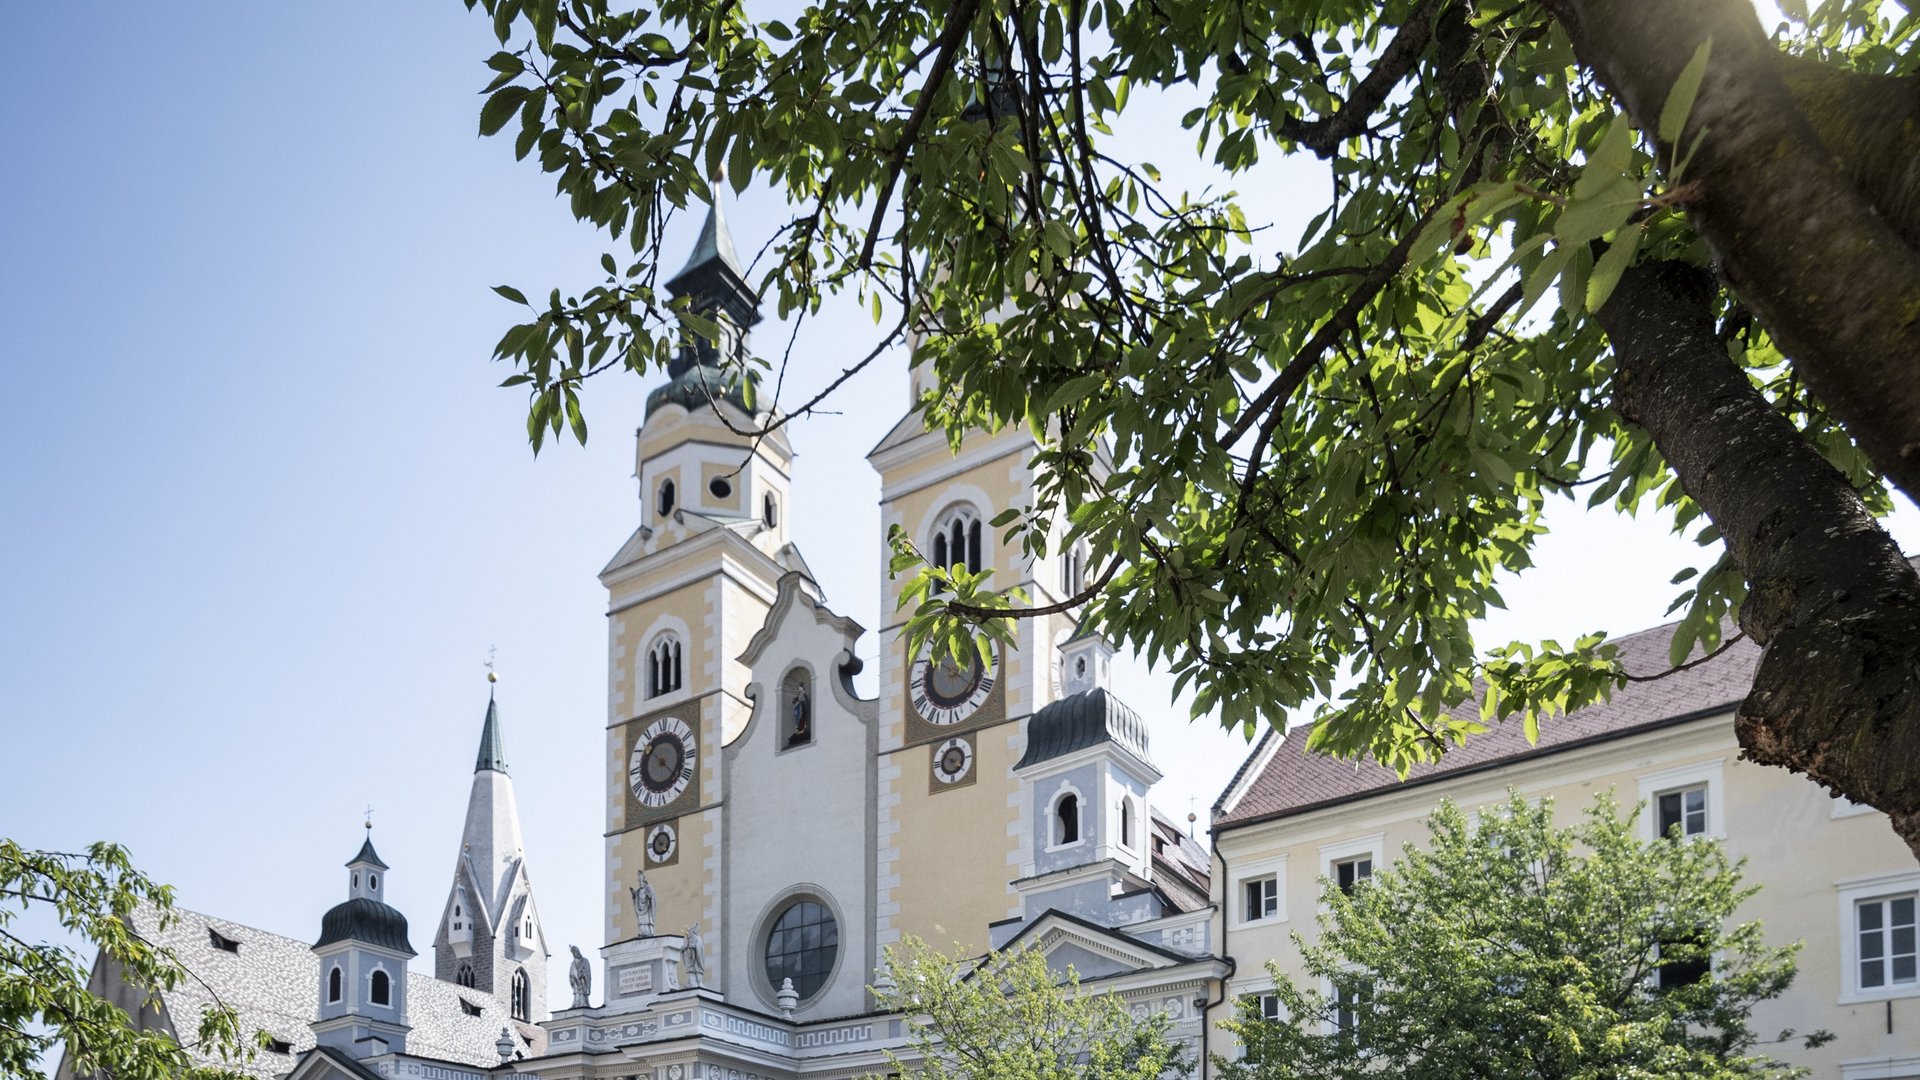 You’ll find these attractions in Brixen, South Tyrol